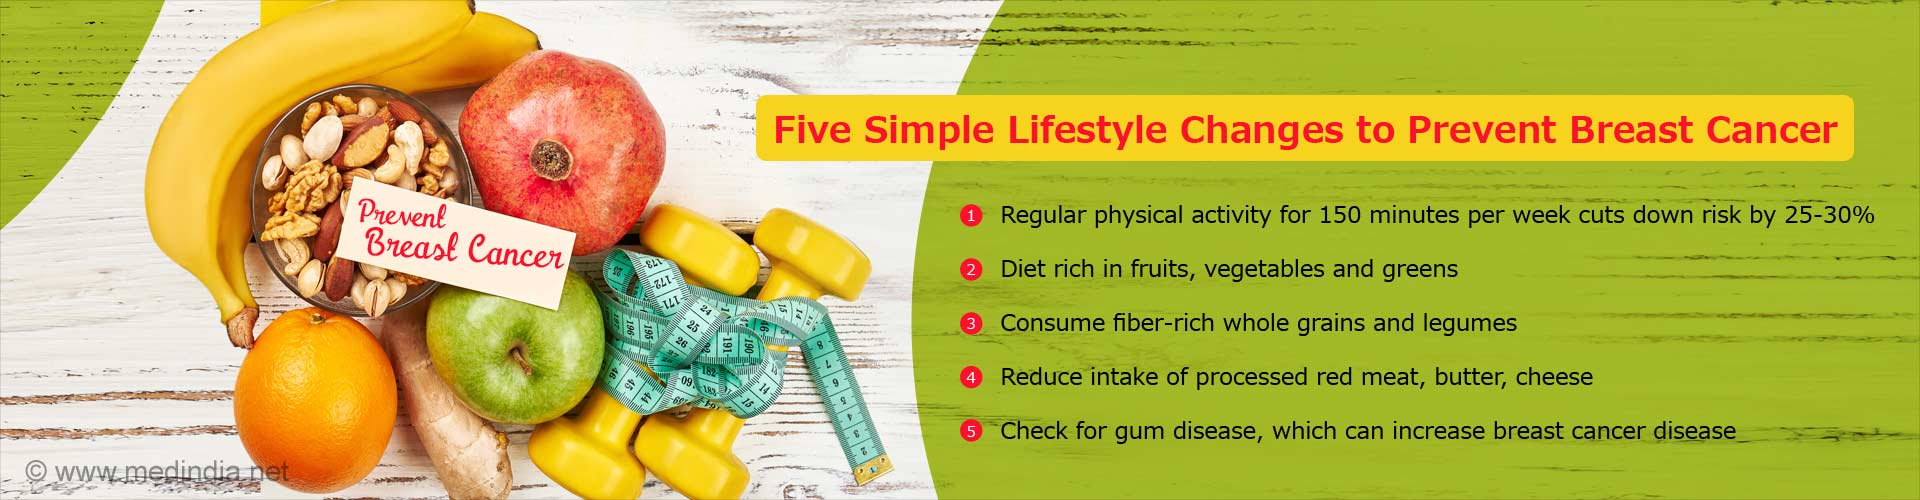 Five simple lifestyle changes to prevent breast cancer
- regular physical activity for 150 minutes per week cuts down risk by 25-30%
- Diet rich in fruits, vegetables and greens
- Consume fiber-rich whole grains and legumes
- Reduce intake of processed red meat, butter cheese
- Check for gum disease, which can increase breast cancer disease